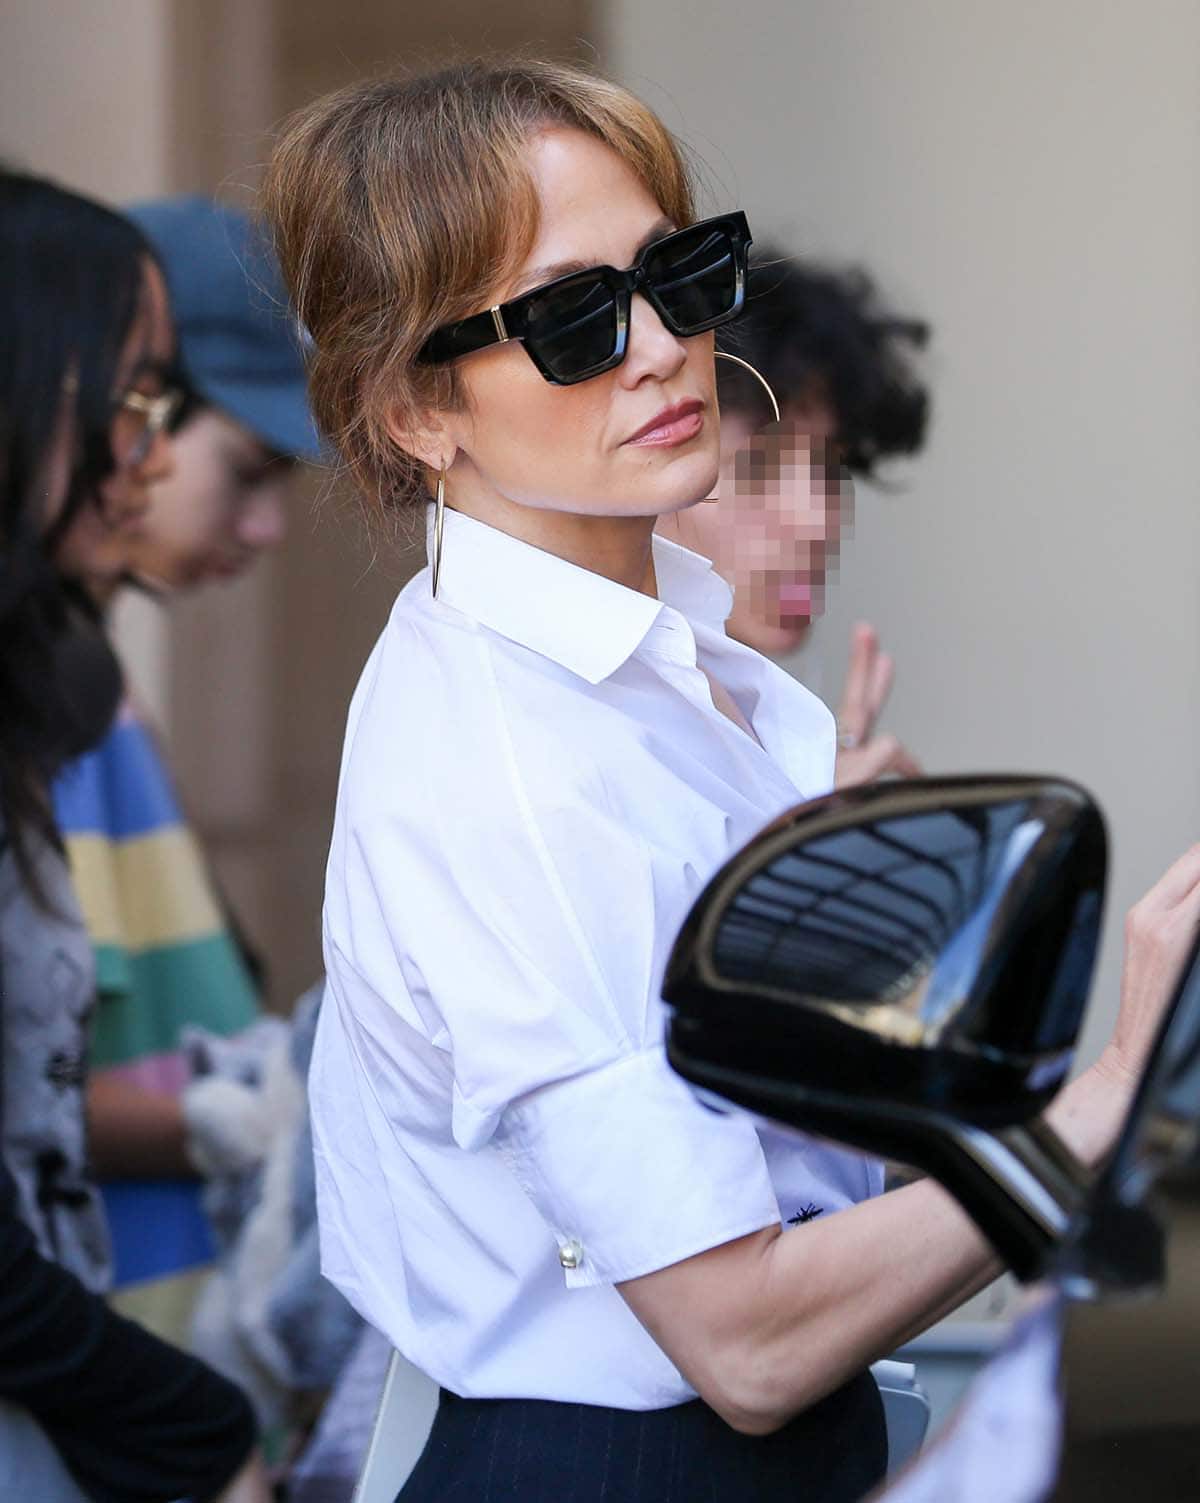 Jennifer Lopez adds bling to her black-and-white office look with Jennifer Fisher hoop earrings and hides her eyes behind James Oro sunglasses